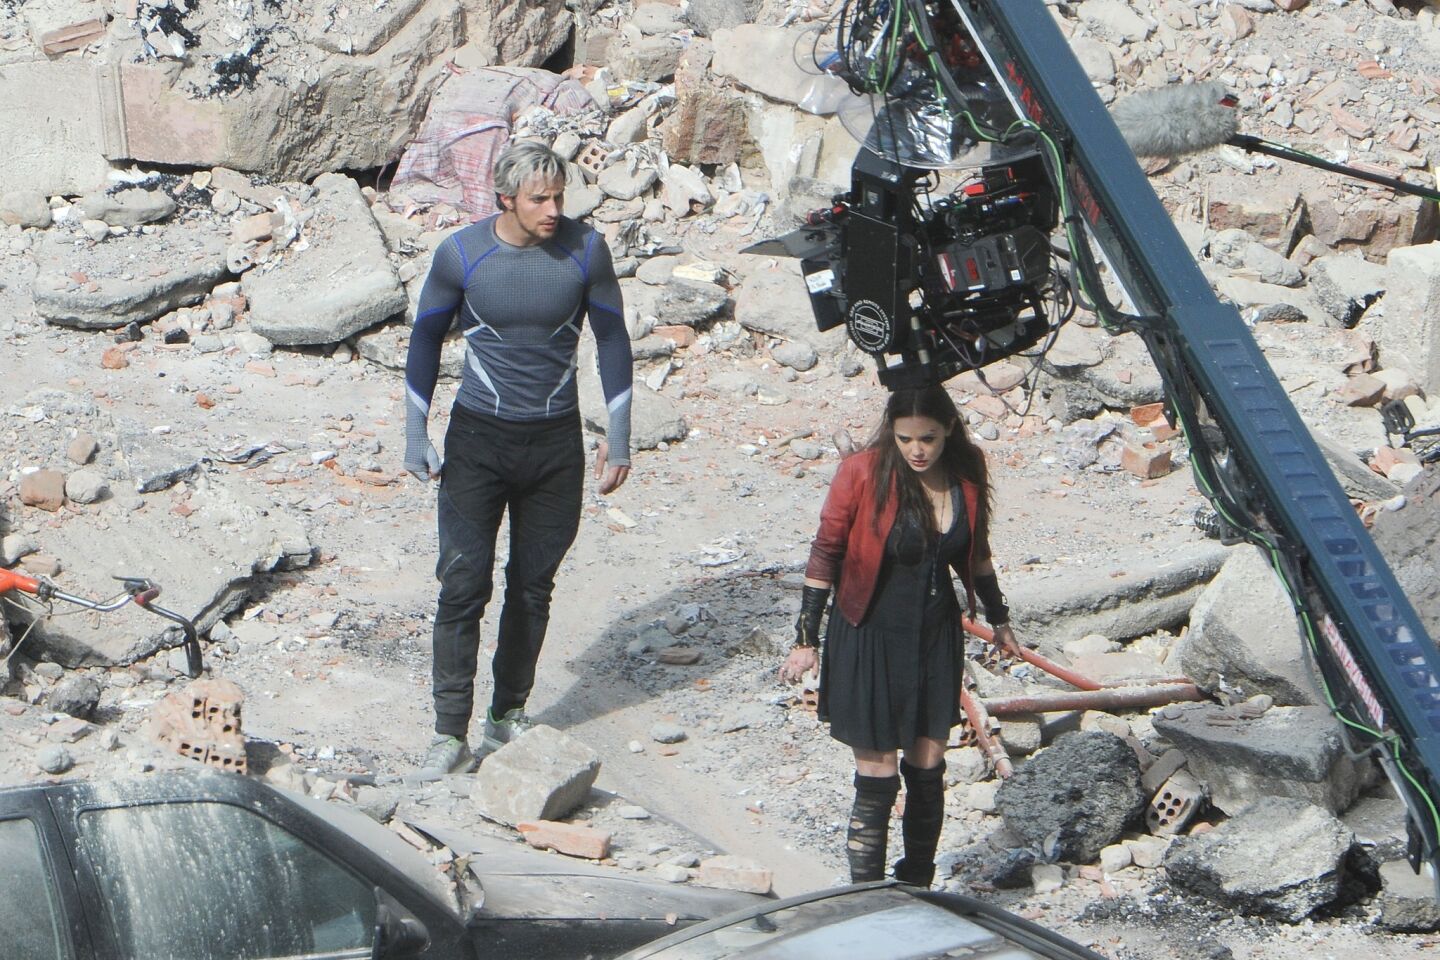 Elizabeth Olsen and Aaron Taylor-Johnson film on location in Pont-Saint-Martin in Aosta, Italy, for "Avengers: Age of Ultron."